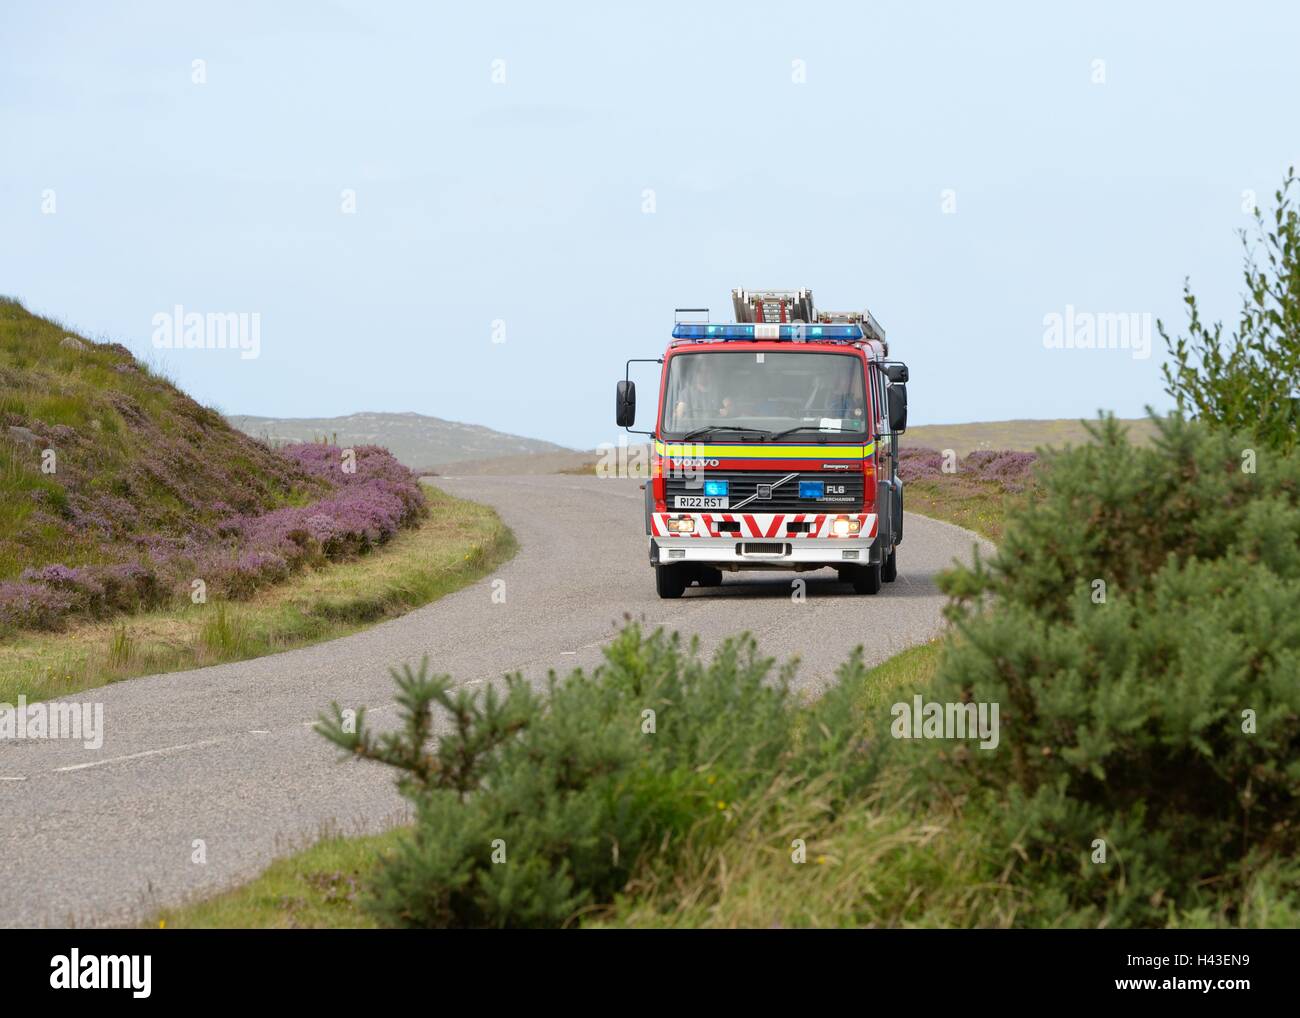 A fire appliance responding to an emergency call in the Scottish Highlands. Stock Photo